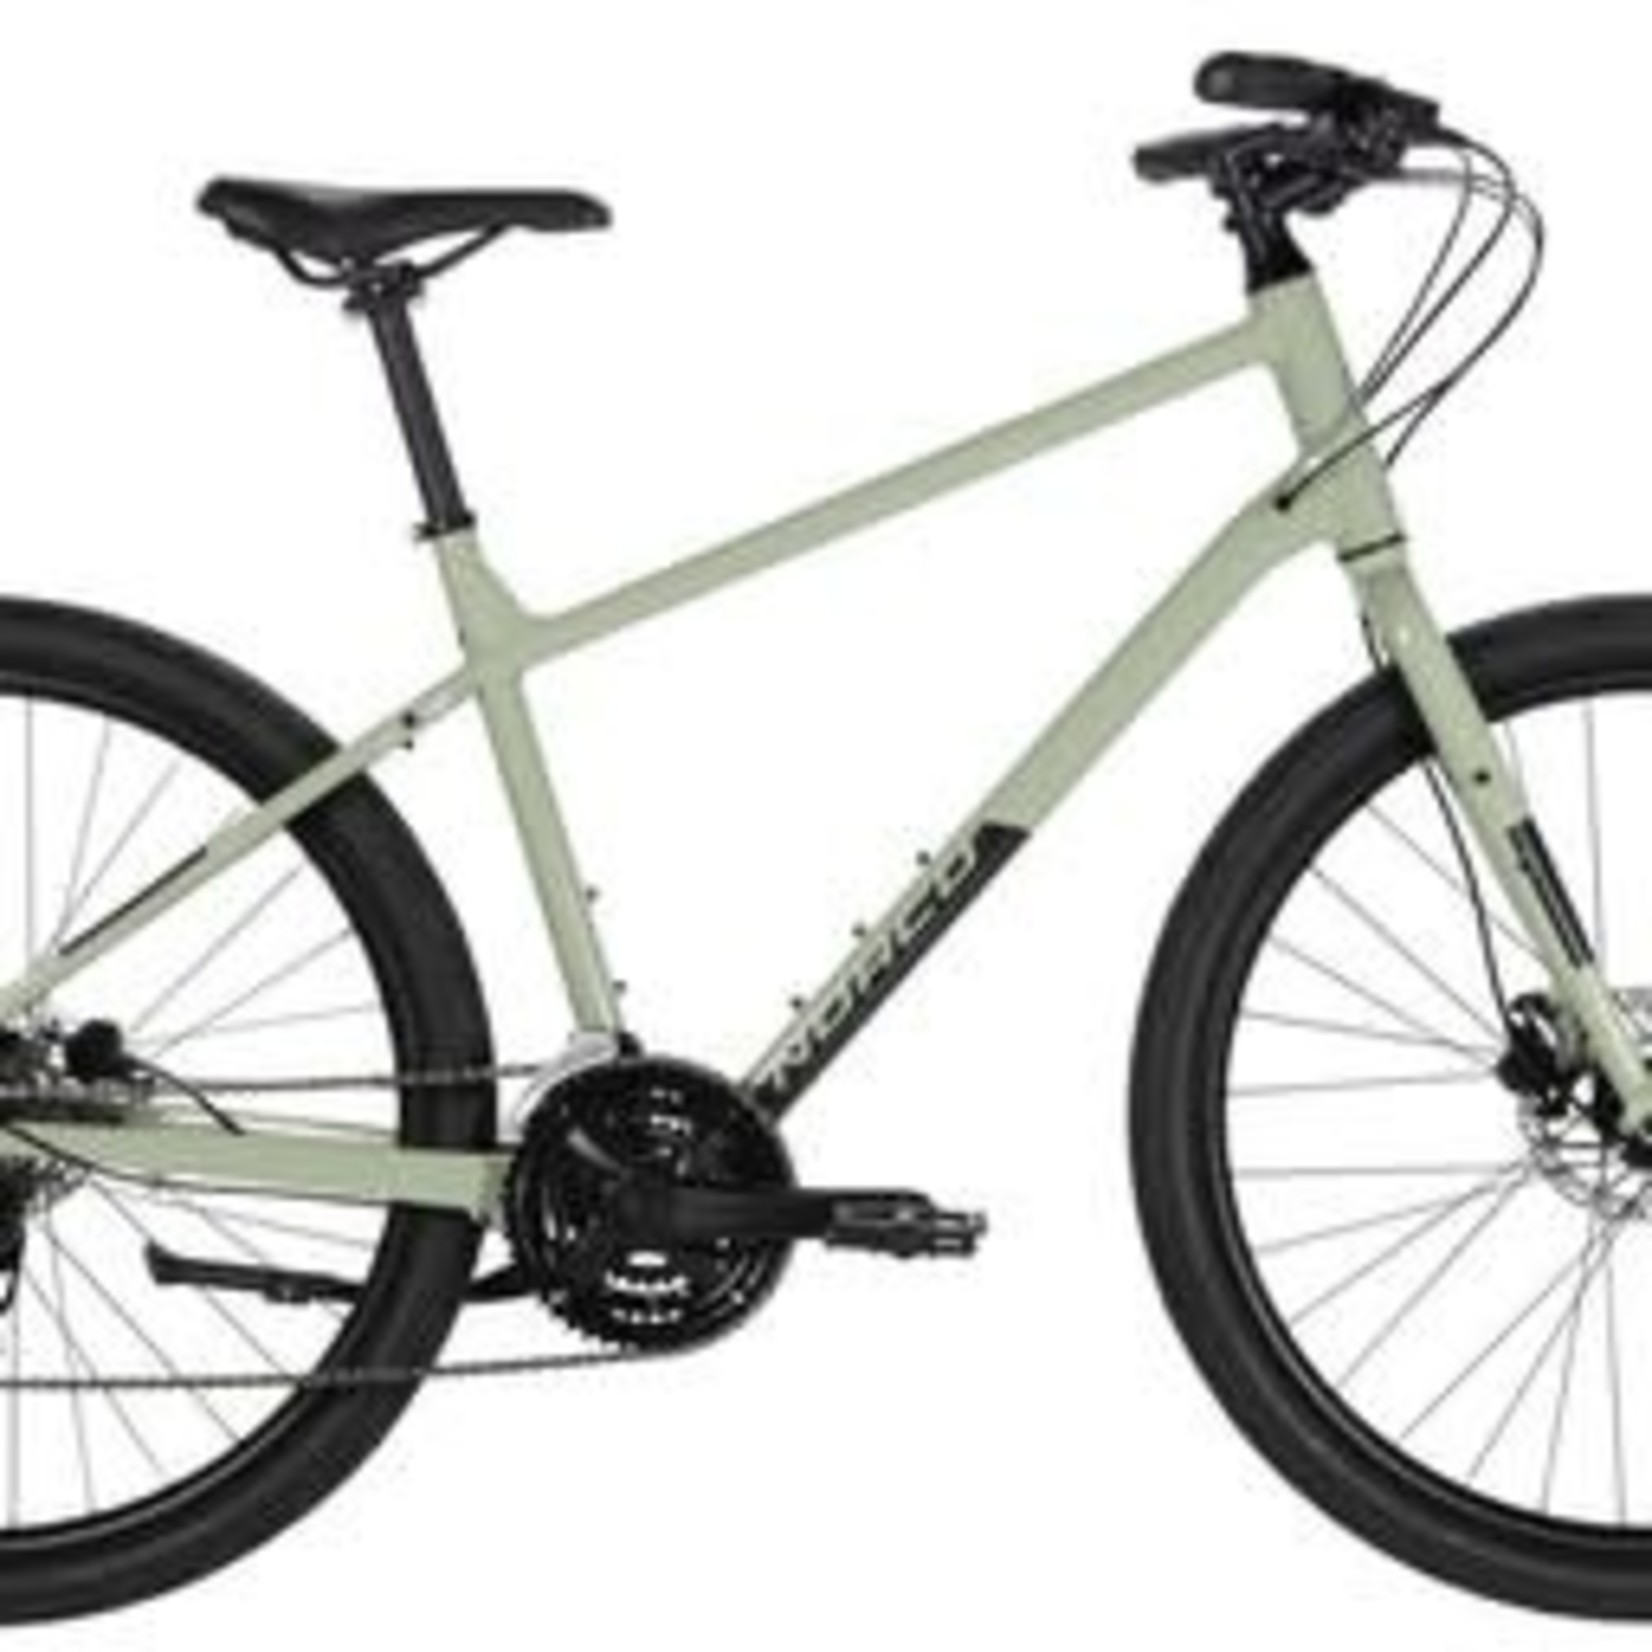 Norco Norco 2021 Indie 3 Hybrid Bike - Green/Black - Small